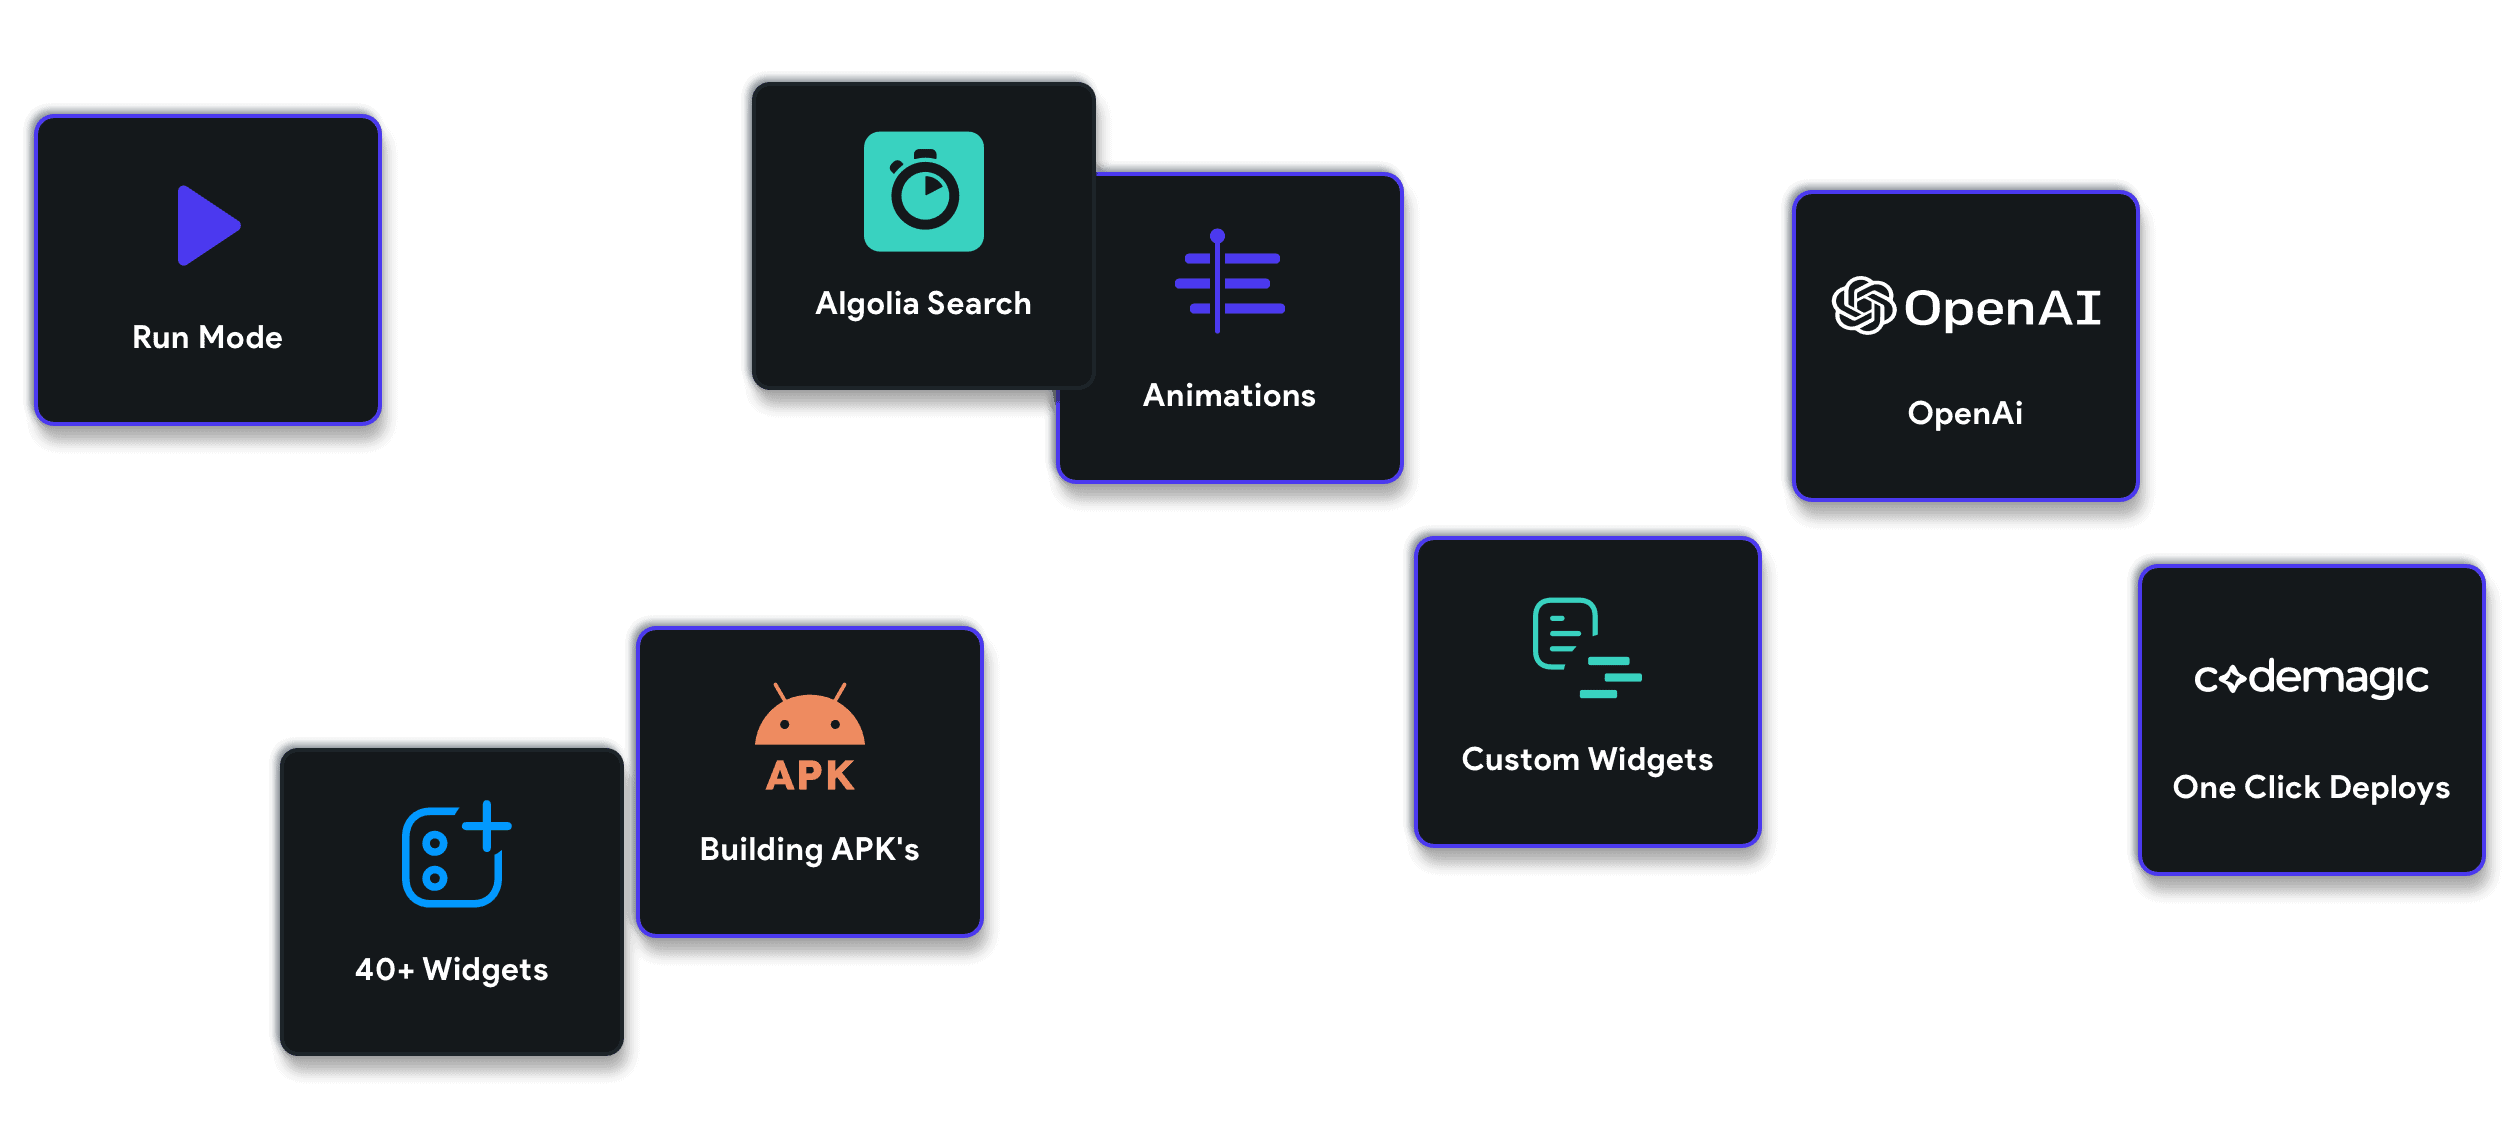 A list of features launched in FlutterFlow in 2021. Run Mode, Chat, Group Chat, Algolia Search, Animations, Firebase Integration, Firestore CMS, Open AI Codex Integration, RevenueCat integration, Custom Widgets, Custom Functions, Push Notifications, Building APKs, Braintree integration, Direct Deploy via Codemagic and more.